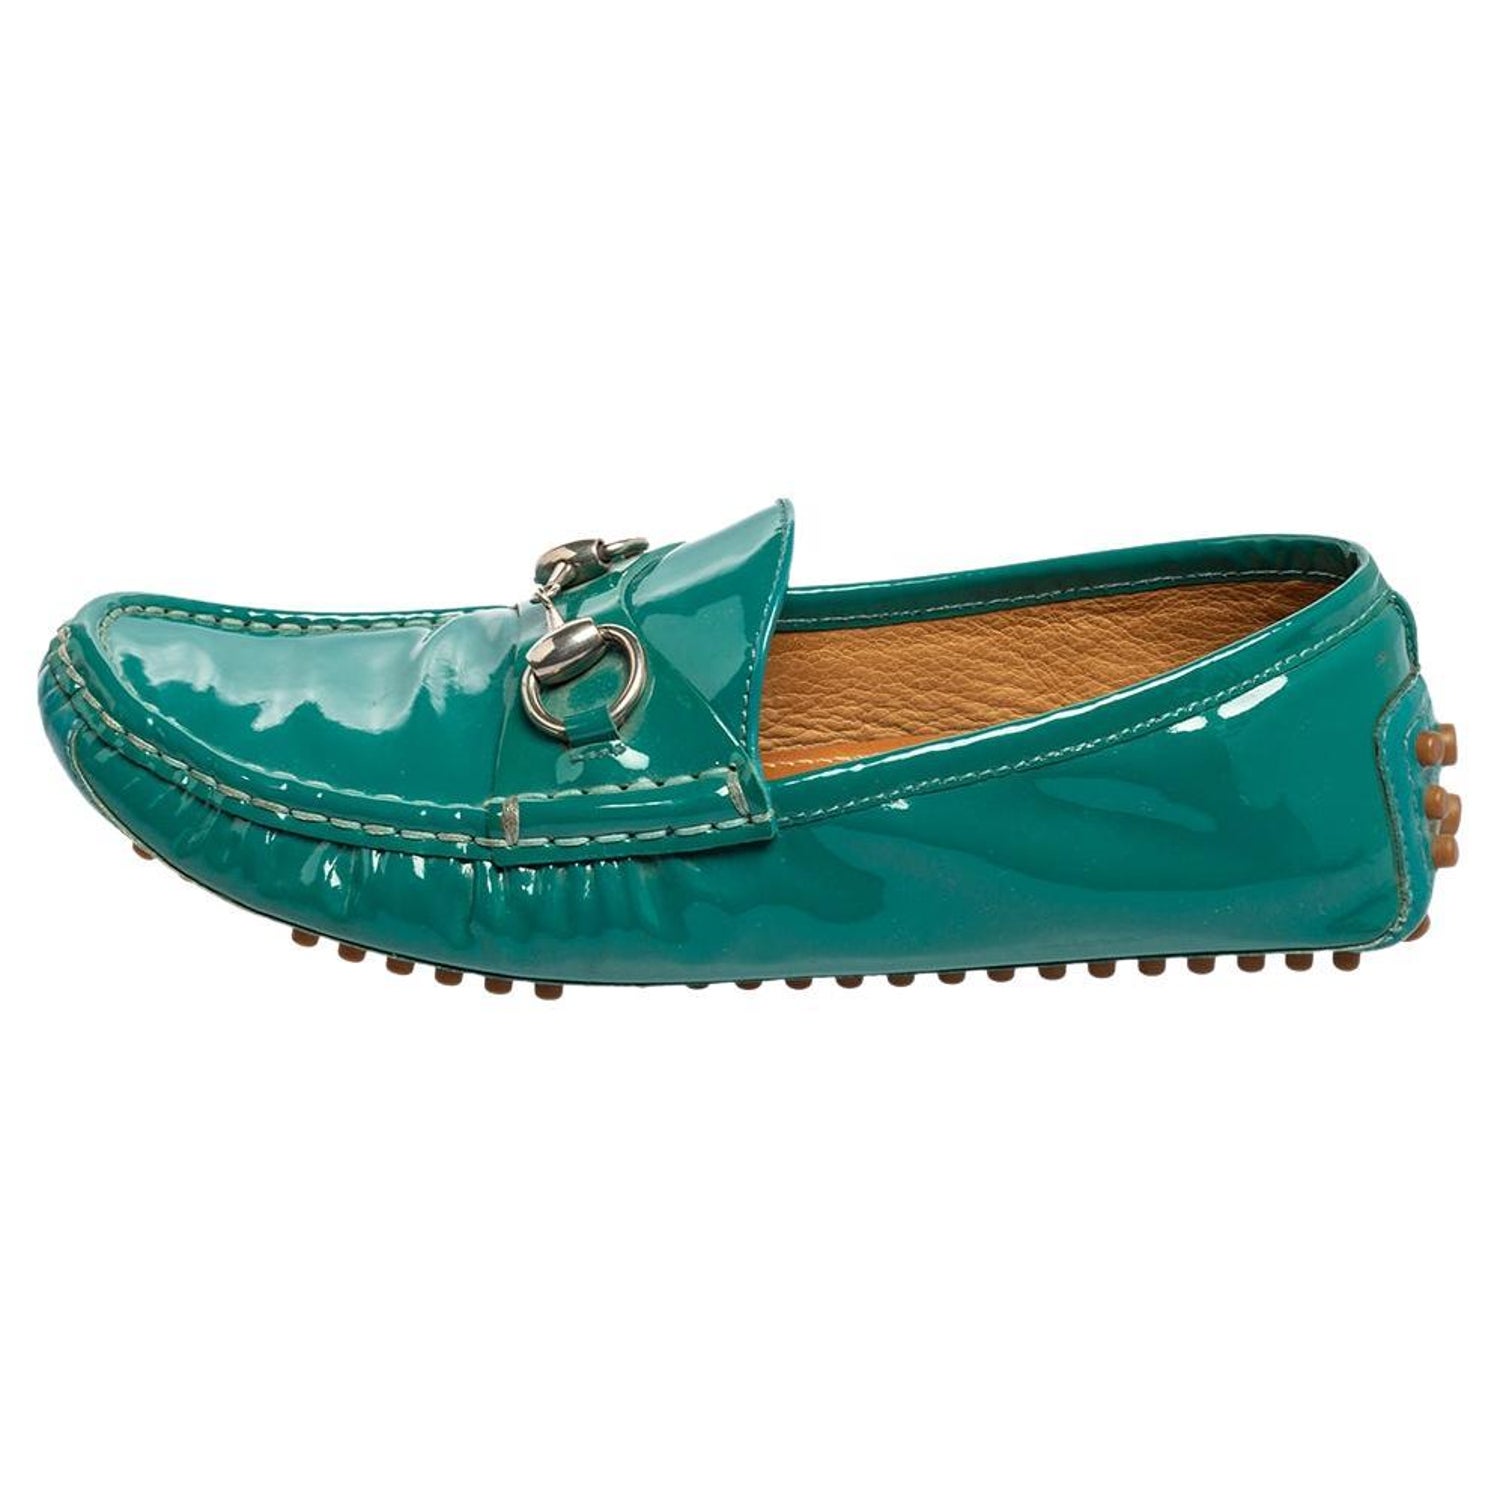 Green Gucci Loafers - 10 For Sale on 1stDibs | green gucci loafers, mens gucci loafers, gucci green loafers